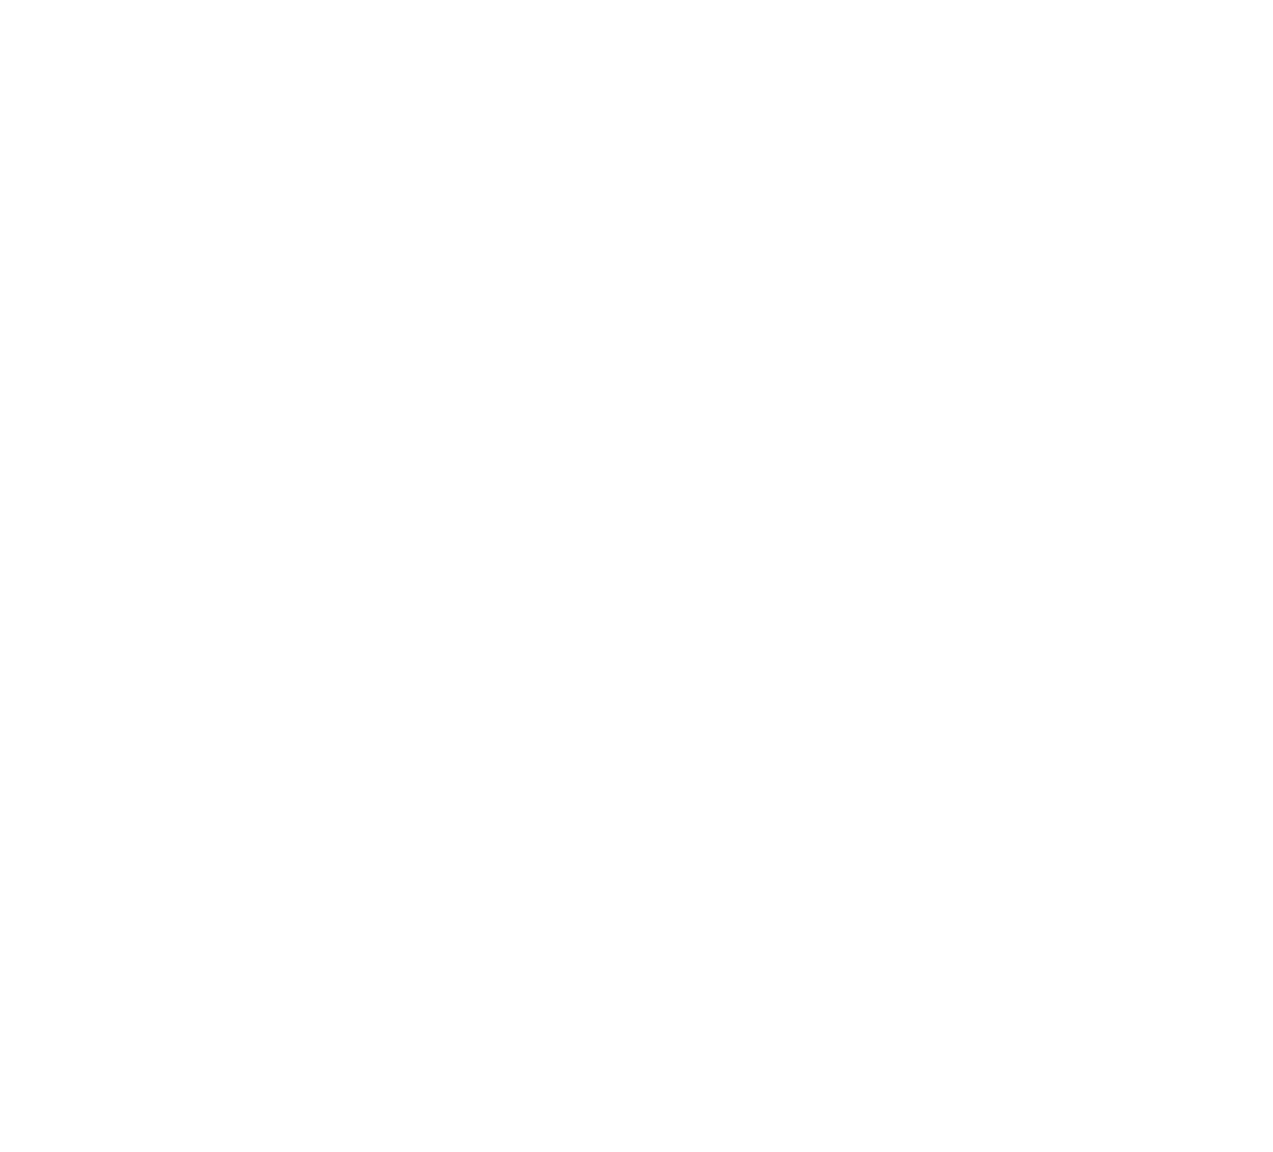 Excellence in Environmental, Social and Governance (Platinum Award)